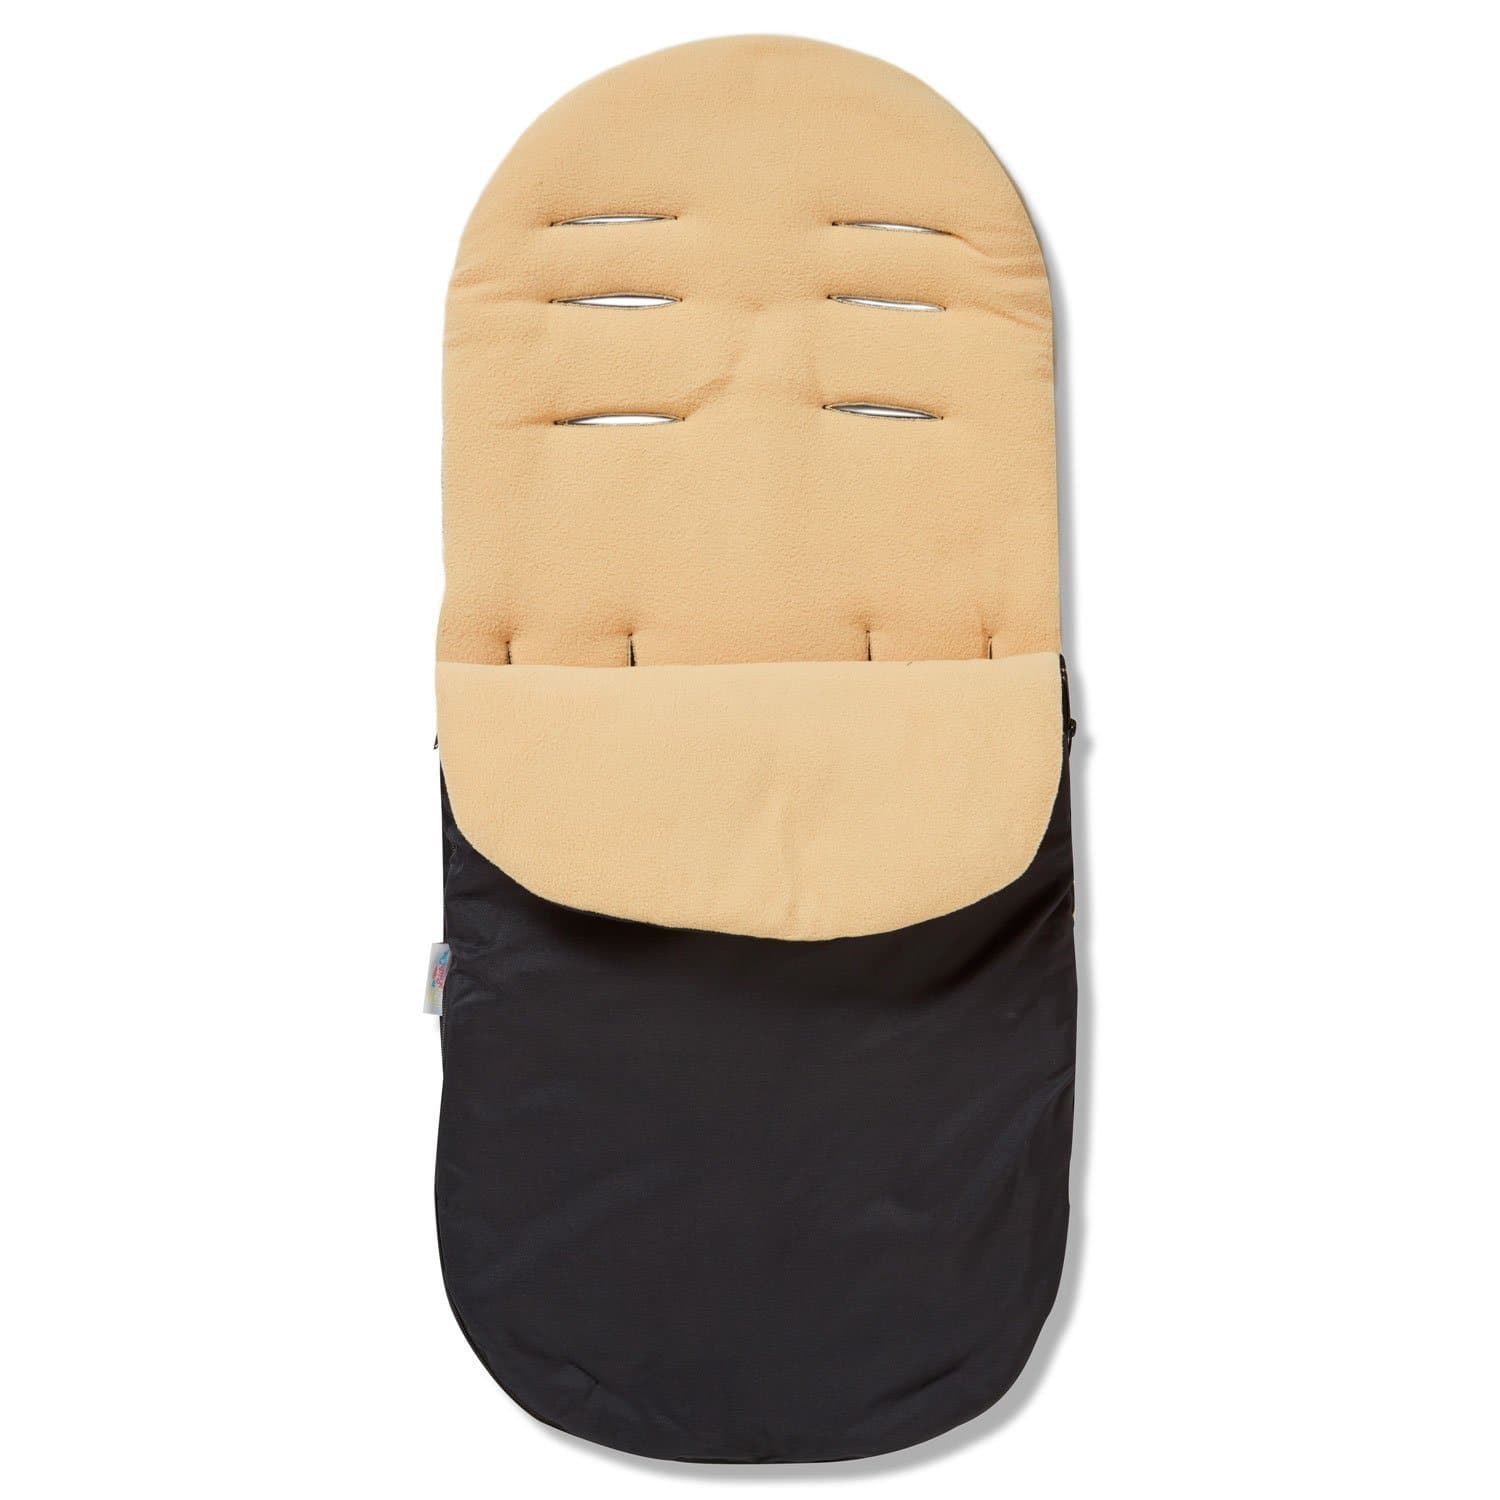 Footmuff / Cosy Toes Compatible with Bumbleride - Sand / Fits All Models | For Your Little One